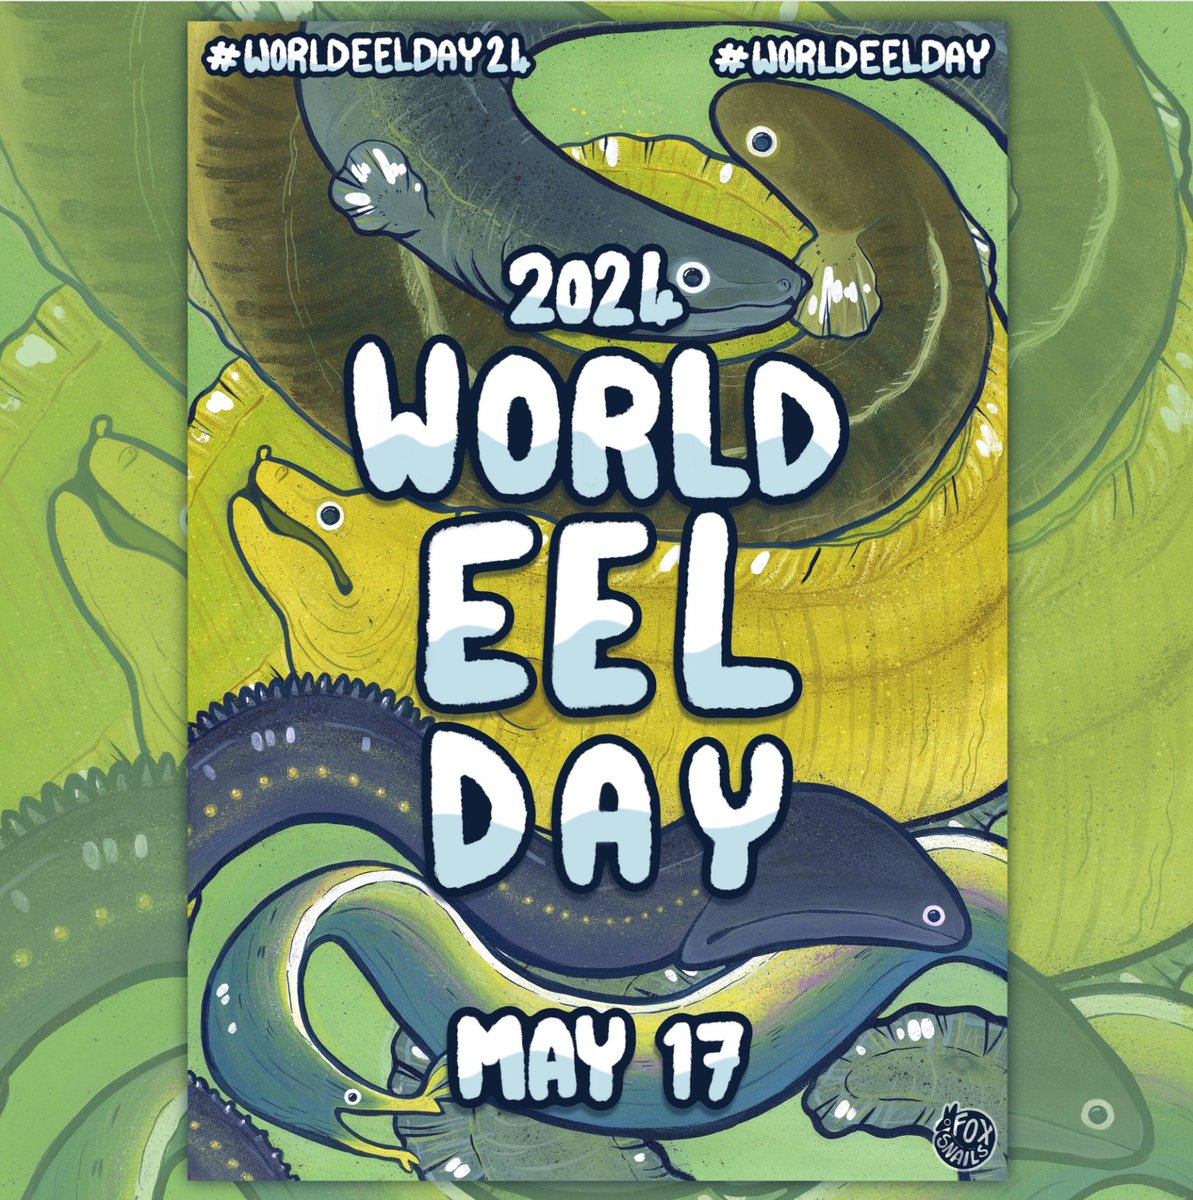 A huge eely thanks to everyone who has contributed or helped to spread word of World Eel Day! one week to go! we are trying to keep the website updated as the submission and event wriggle in! watch this space worldeelday.cargo.site #eels #worldeelday #worldeelday24